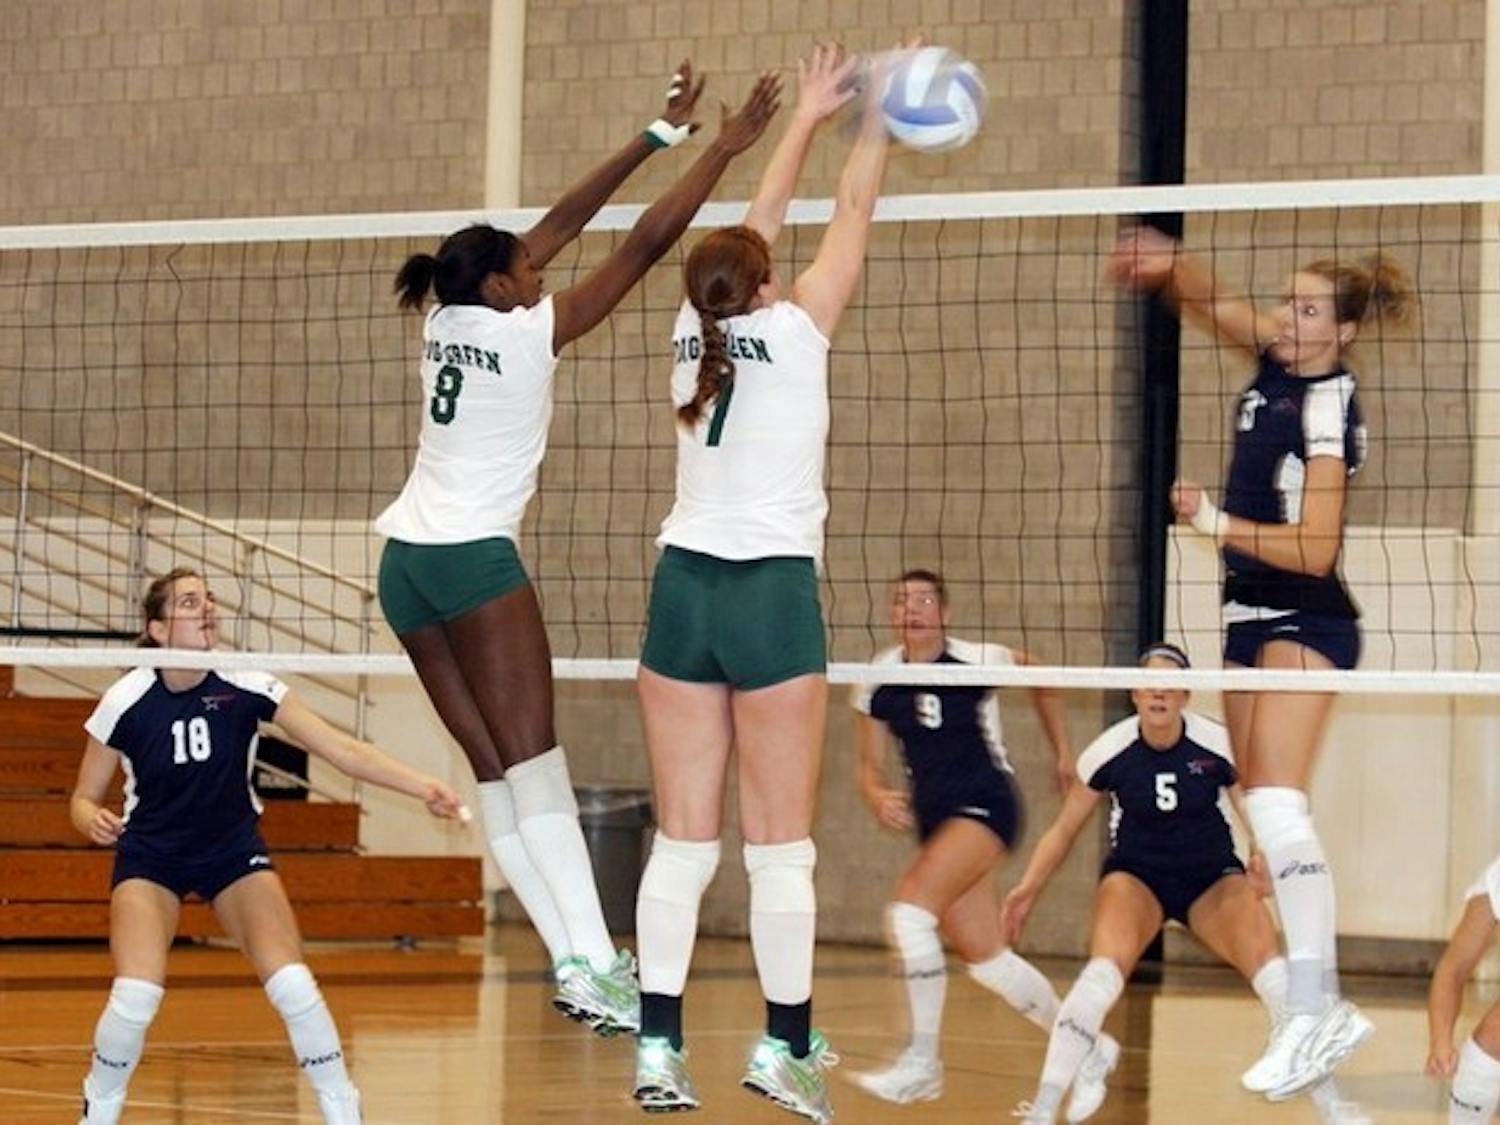 Volleyball didn't win a game against UNH, but the contest was closer than the score suggests. While the team didn't appear to show up until a few minutes into the match, the Big Green played right with the Wildcats for the remainder.